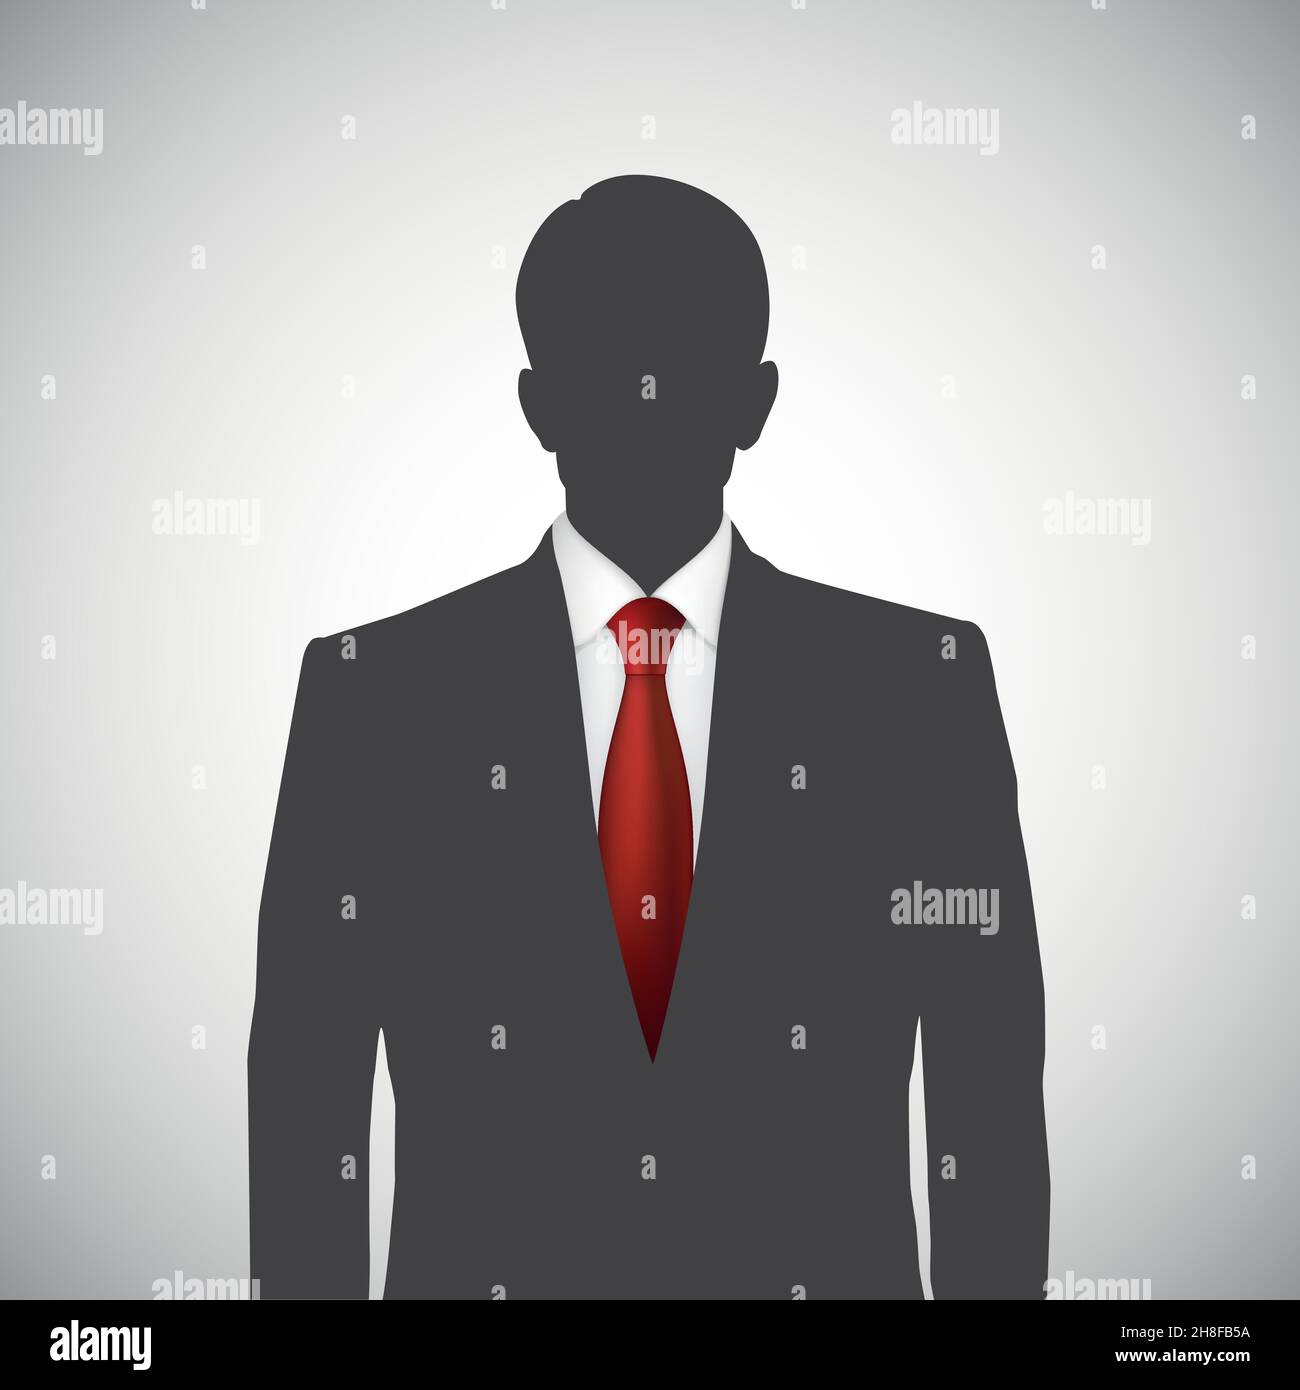 Unknown person silhouette whith red tie Stock Vector